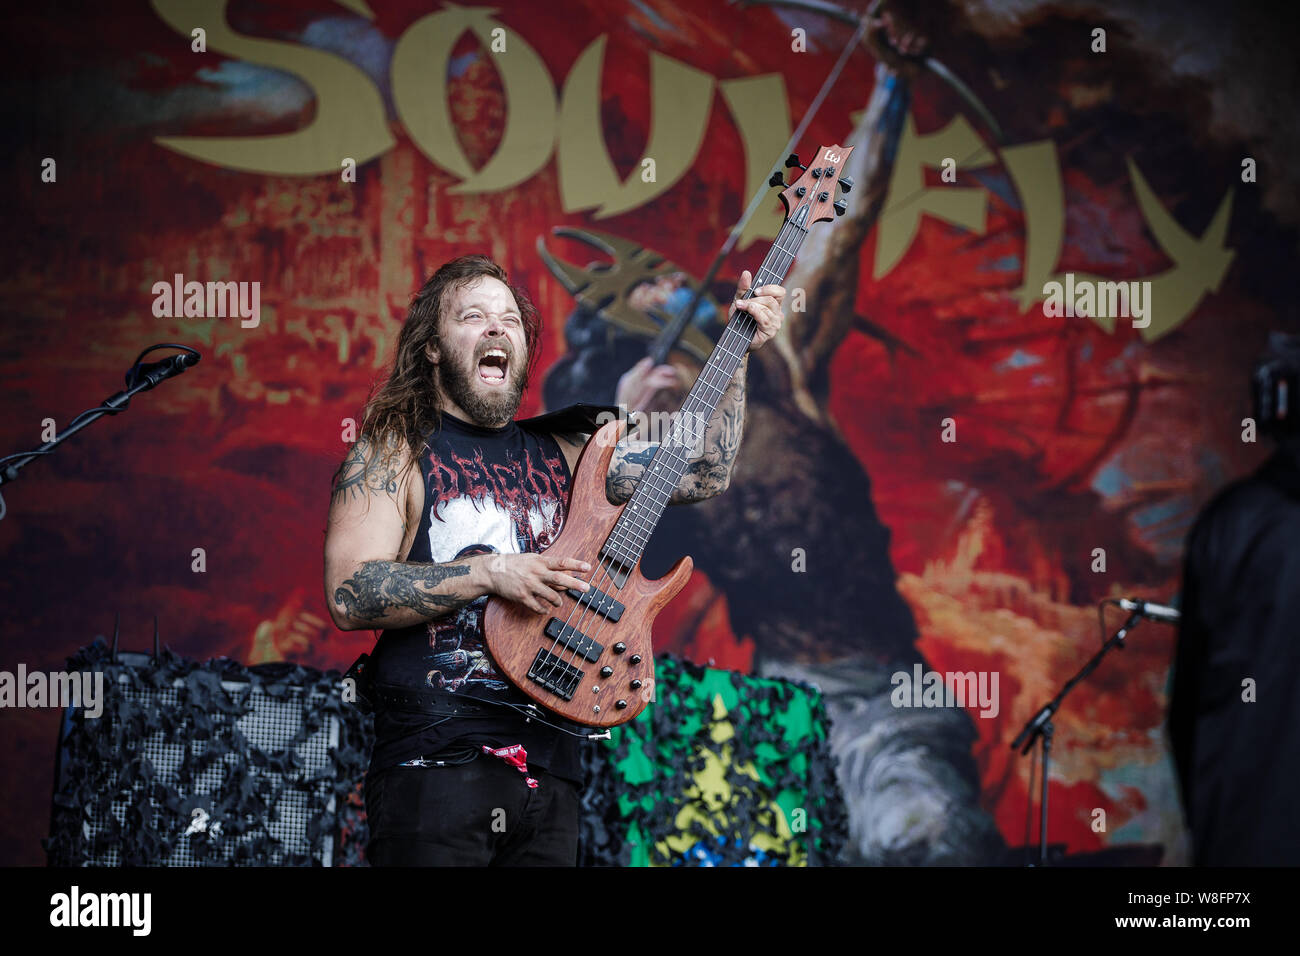 Soulfly perform live on stage at Bloodstock Open Air Festival, UK, 9th Aug, 2019. Stock Photo